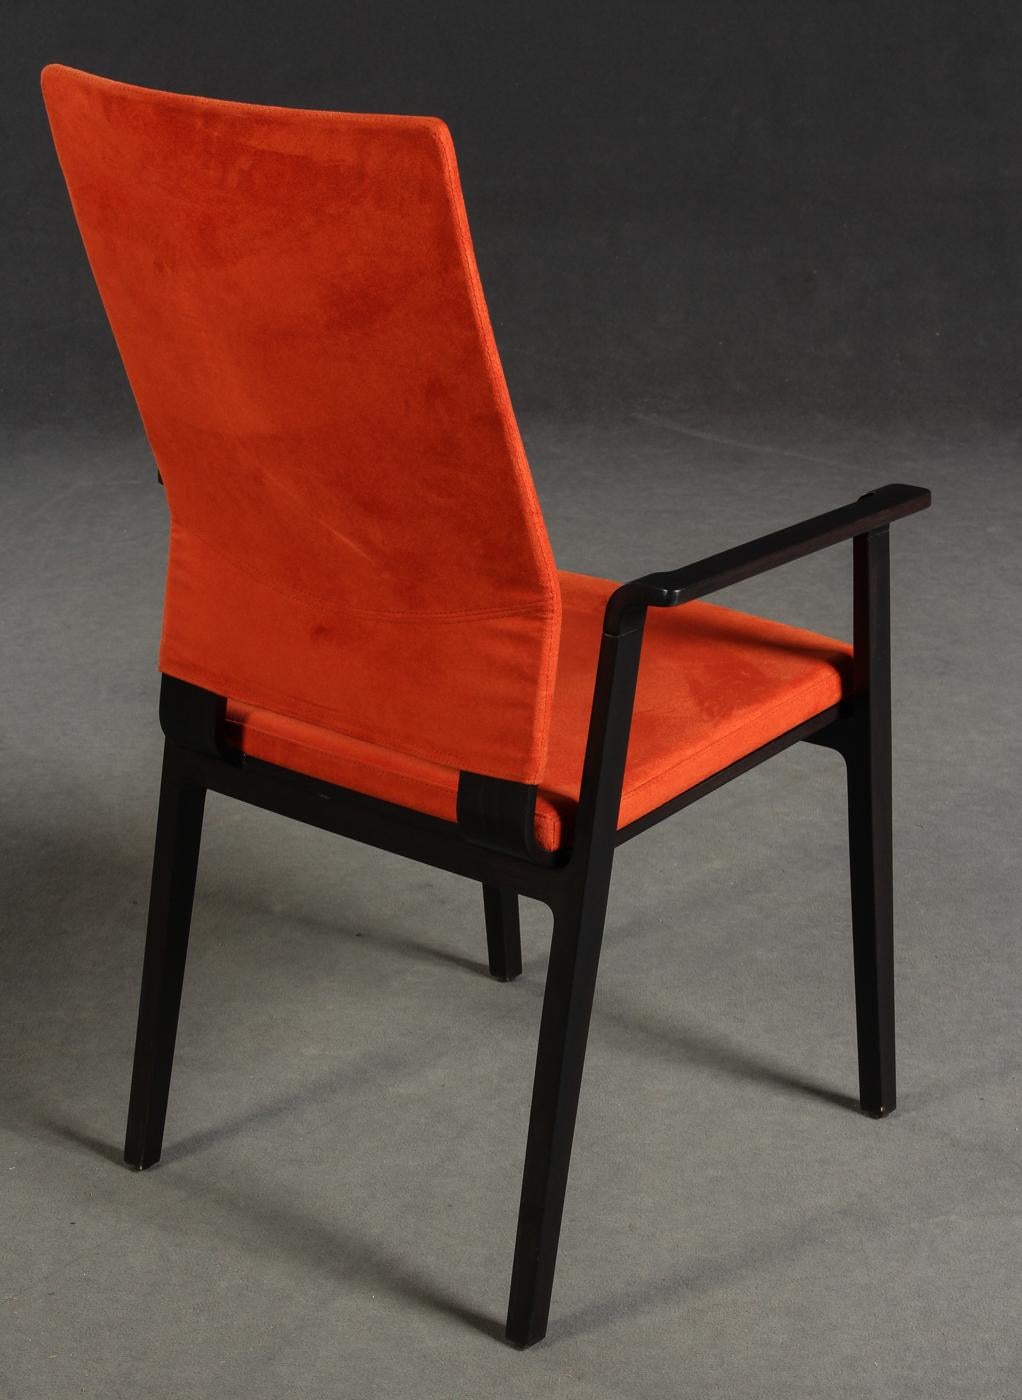 Armchair by Martin Ballendat for Brunner, model Window 3441 / A. Frame with armrests in dark lacquered beech plywood.